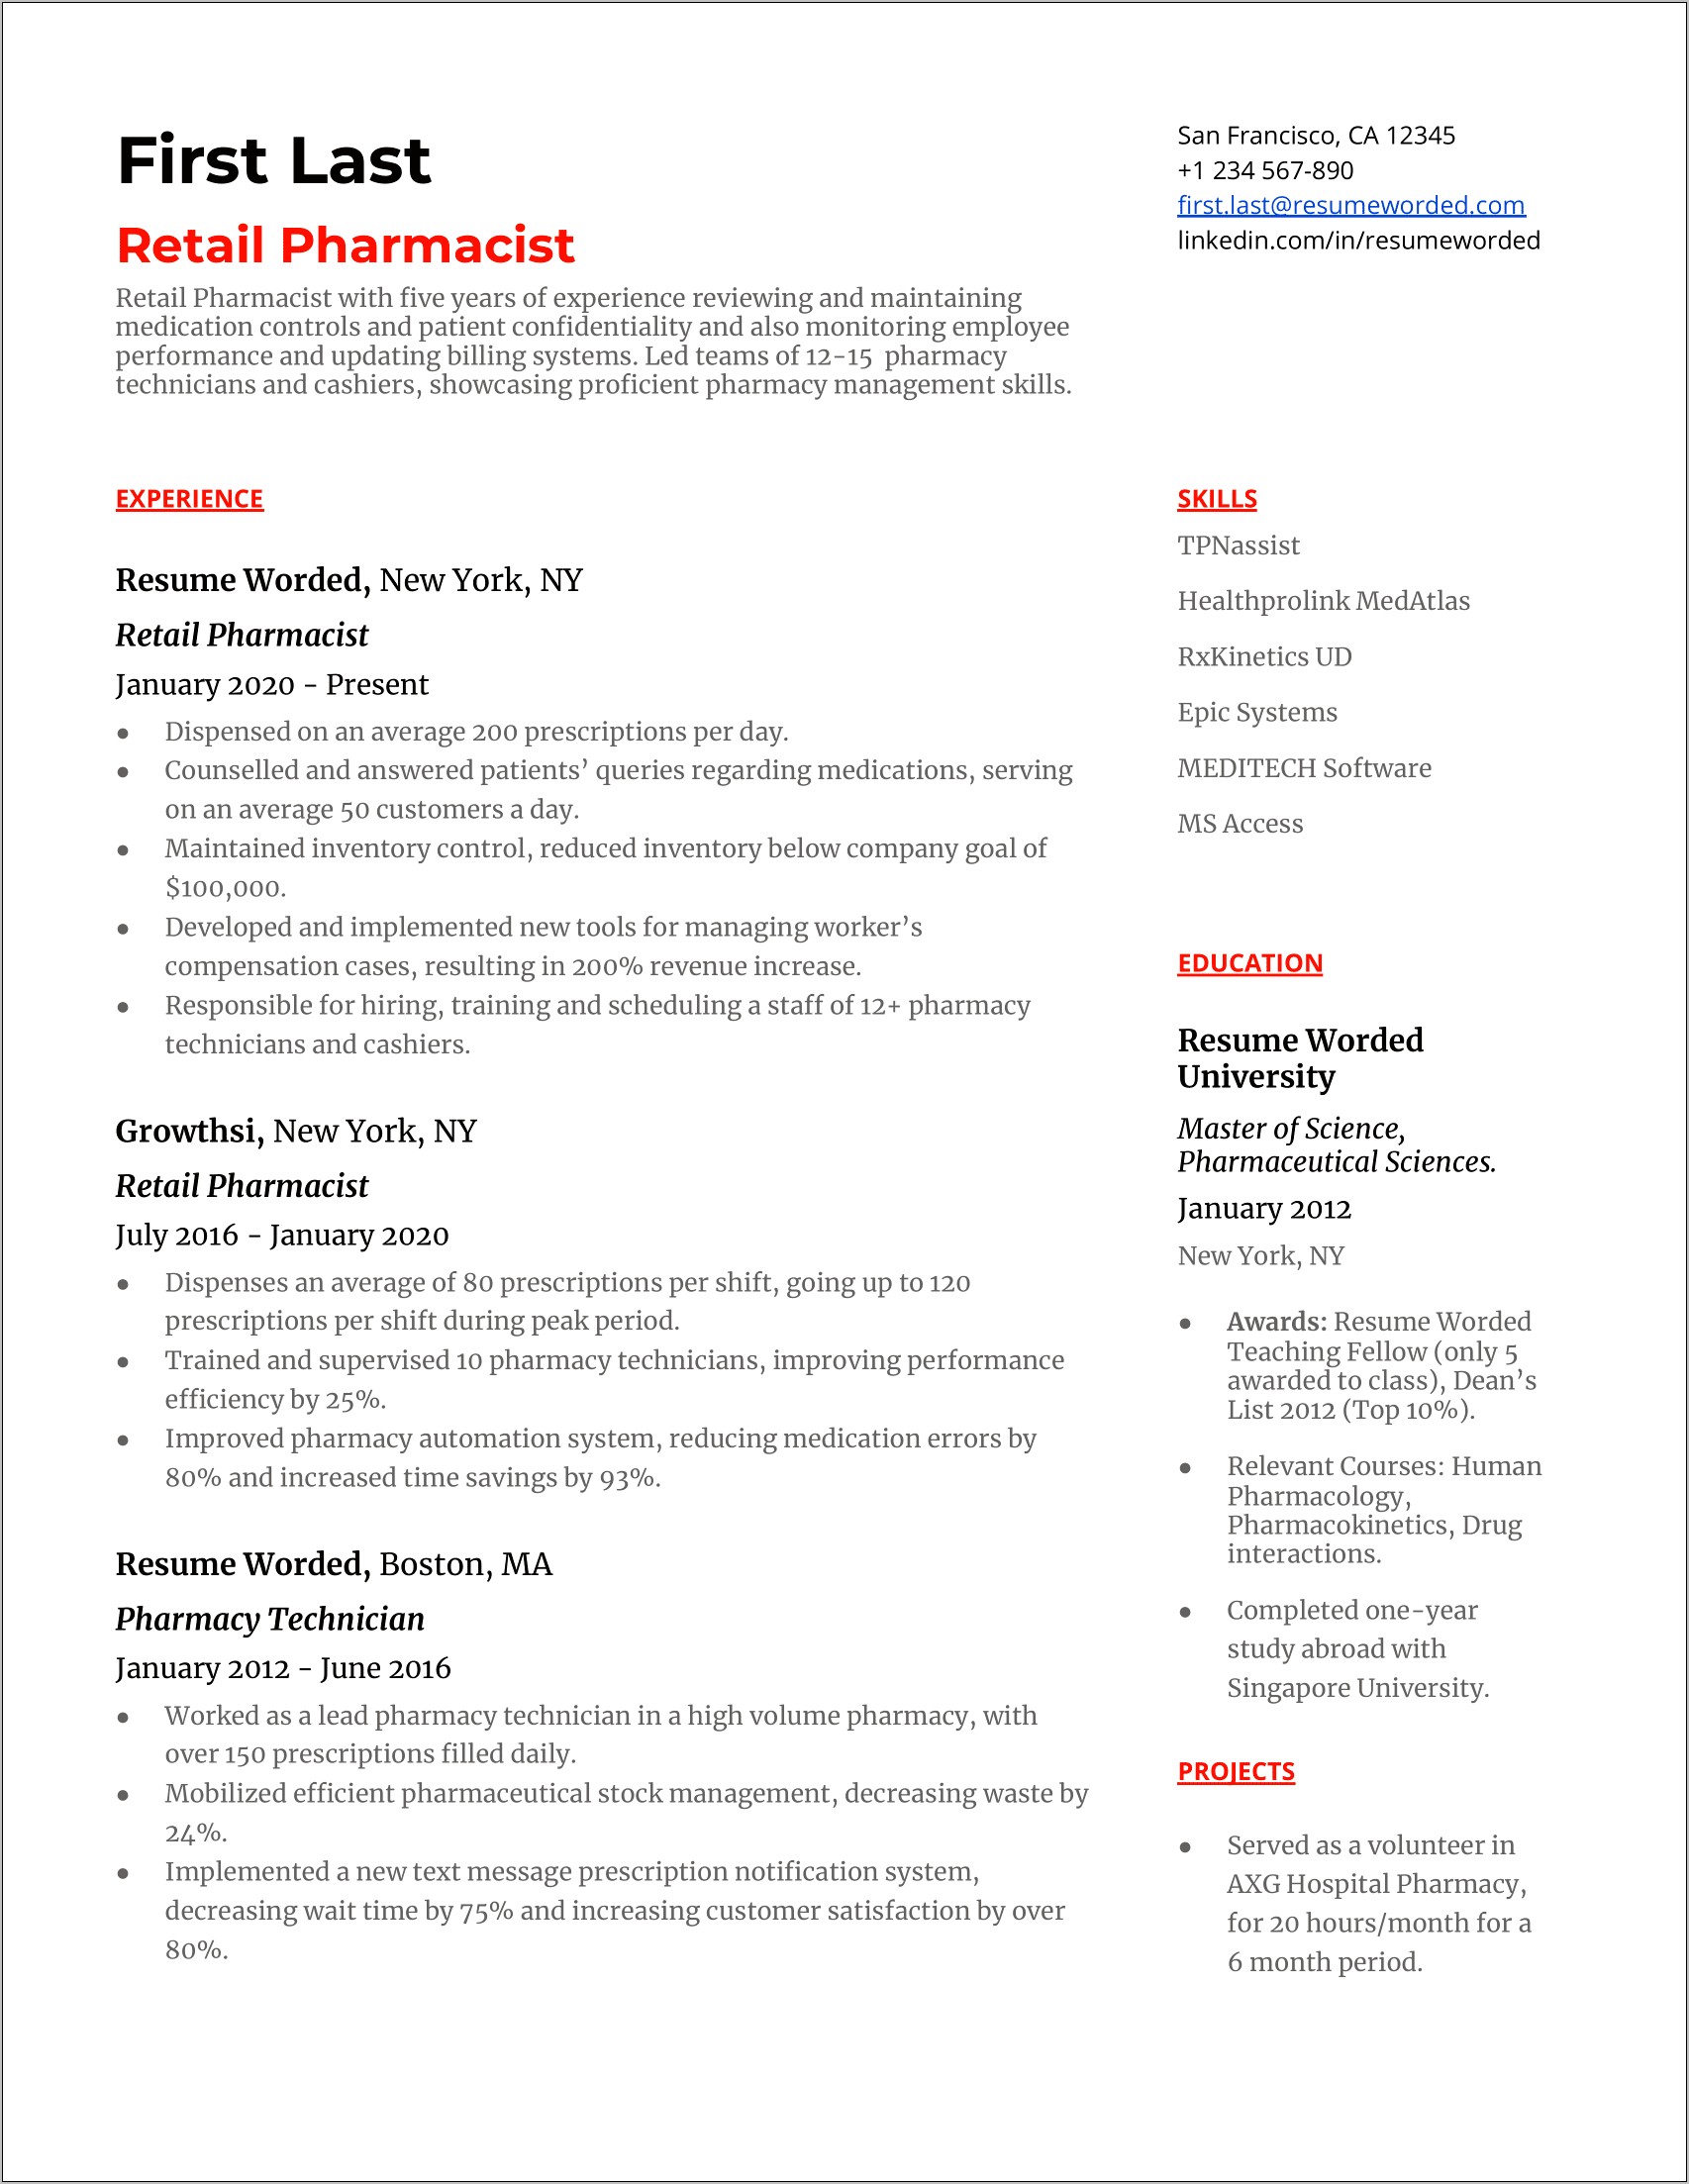 Clinical Pharmacist Resume Objective Statement